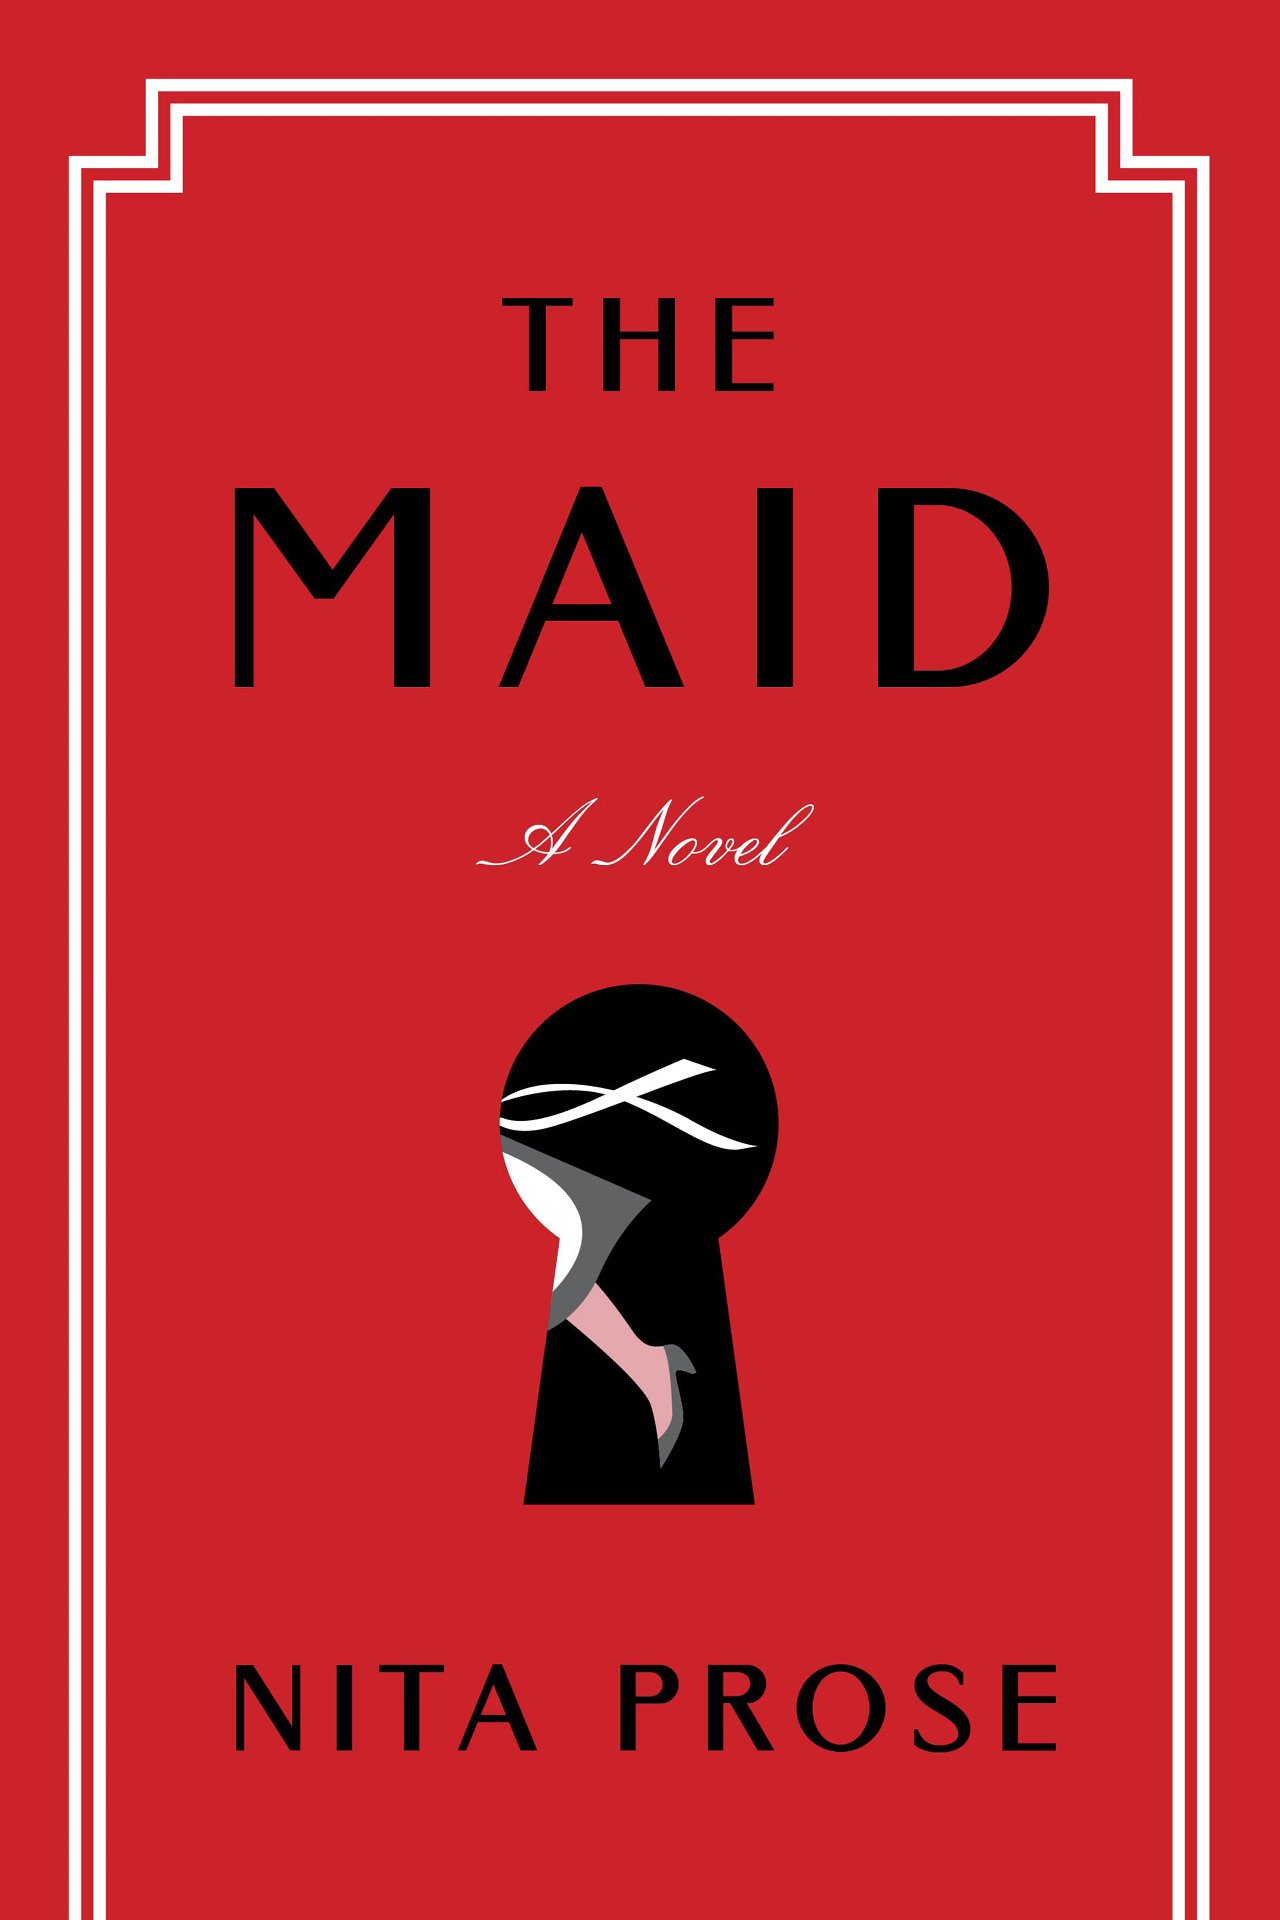 The cover of The Maid by Nita Prose